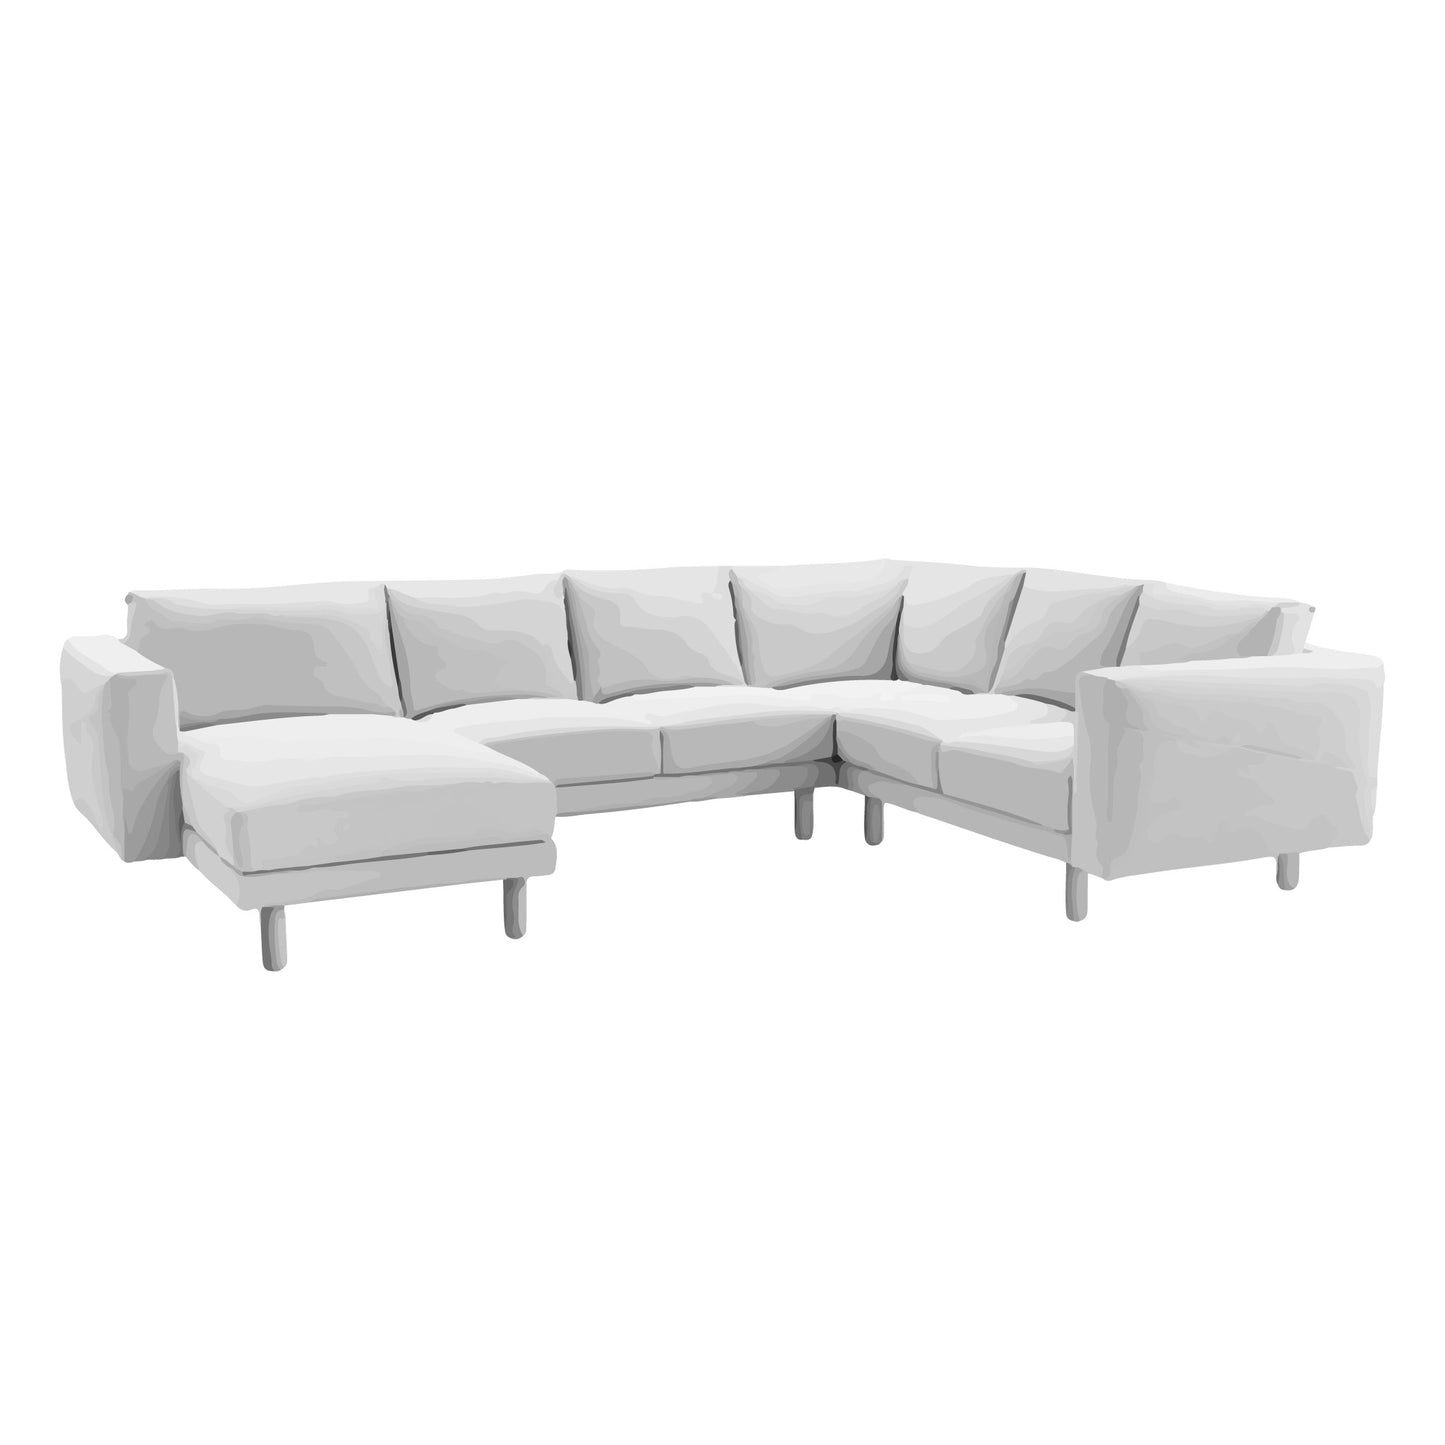 Norsborg Corner 5 Seater Sofa with Chaise Cover